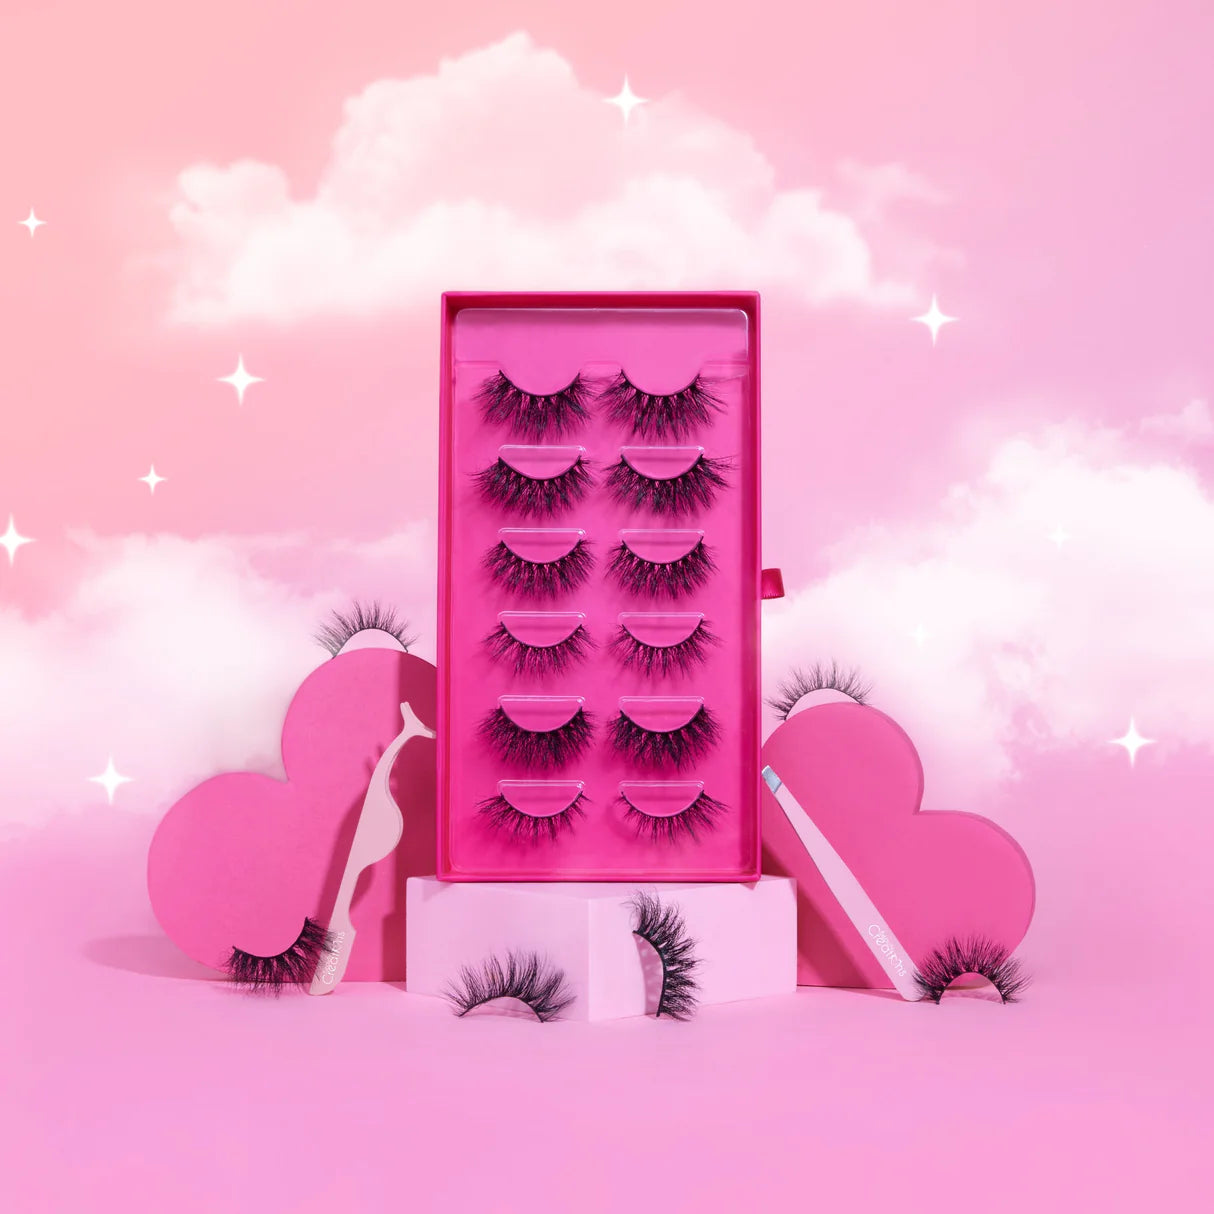 BEAUTY CREATIONS - 3D FAUX MINK LASHES SET OF 6 PAIRS